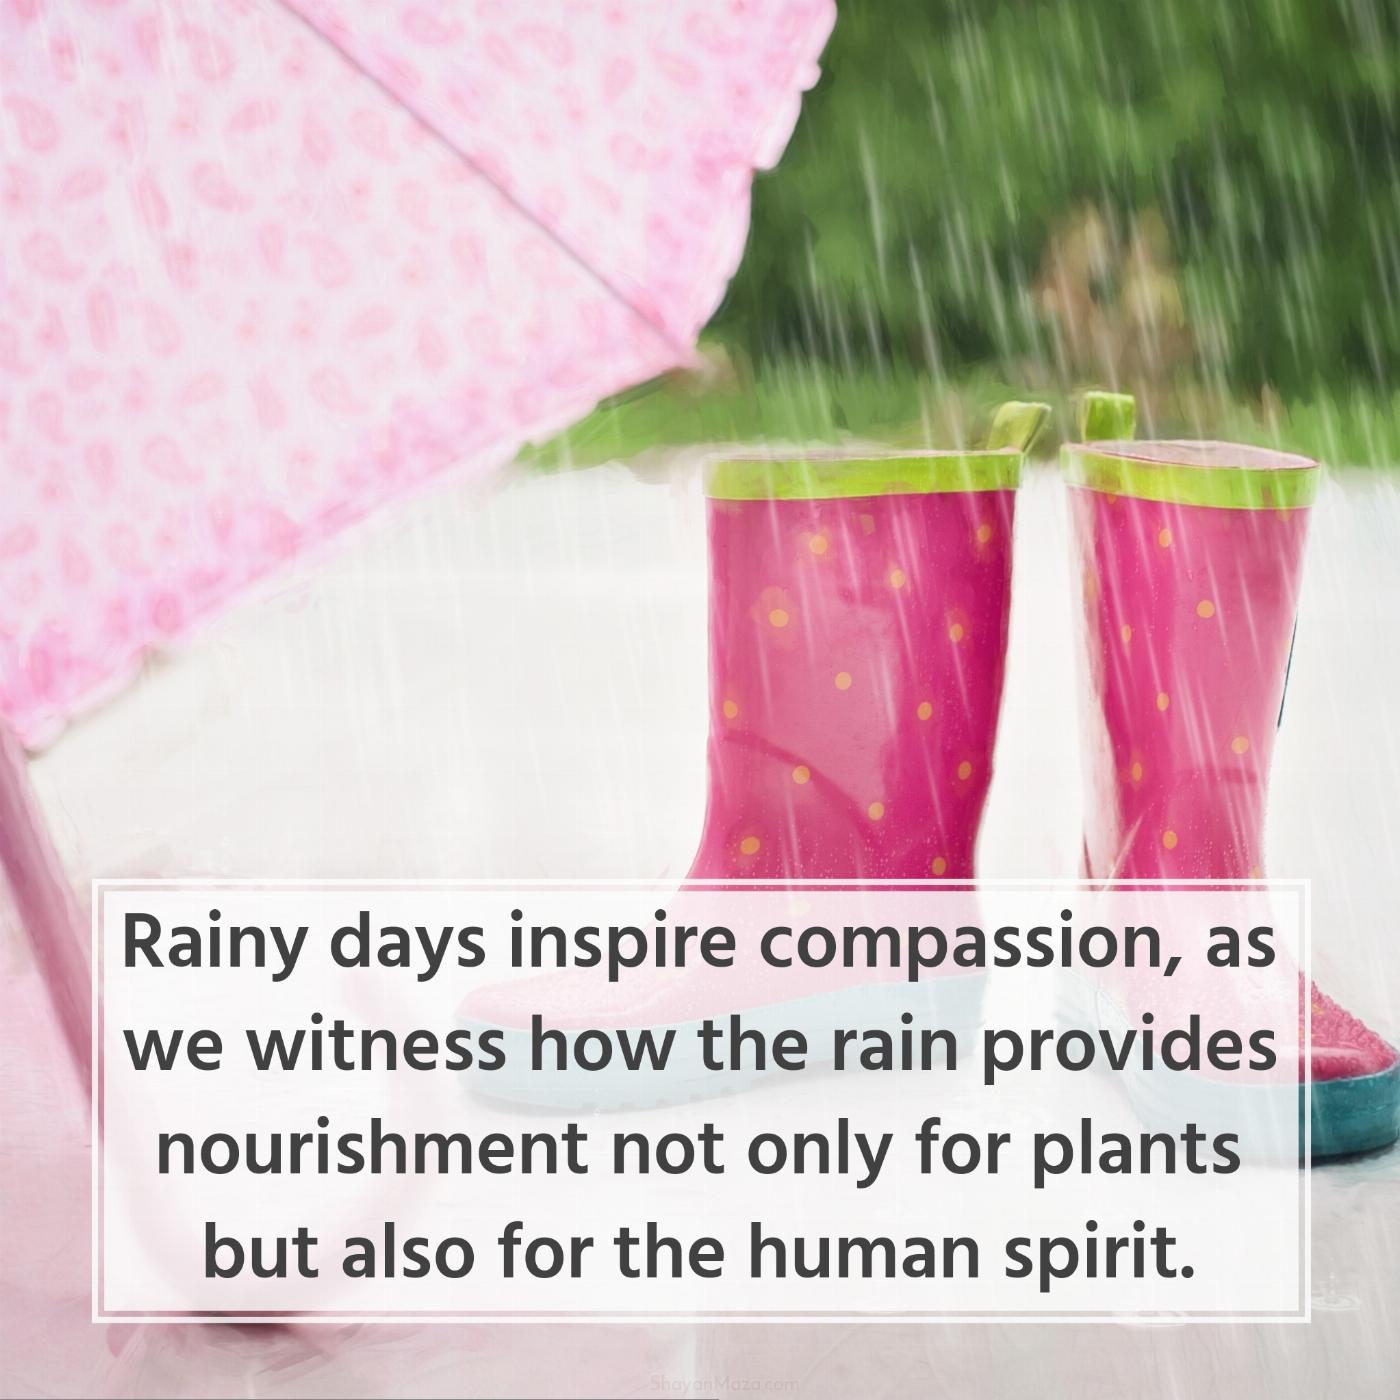 Rainy days inspire compassion as we witness how the rain provides